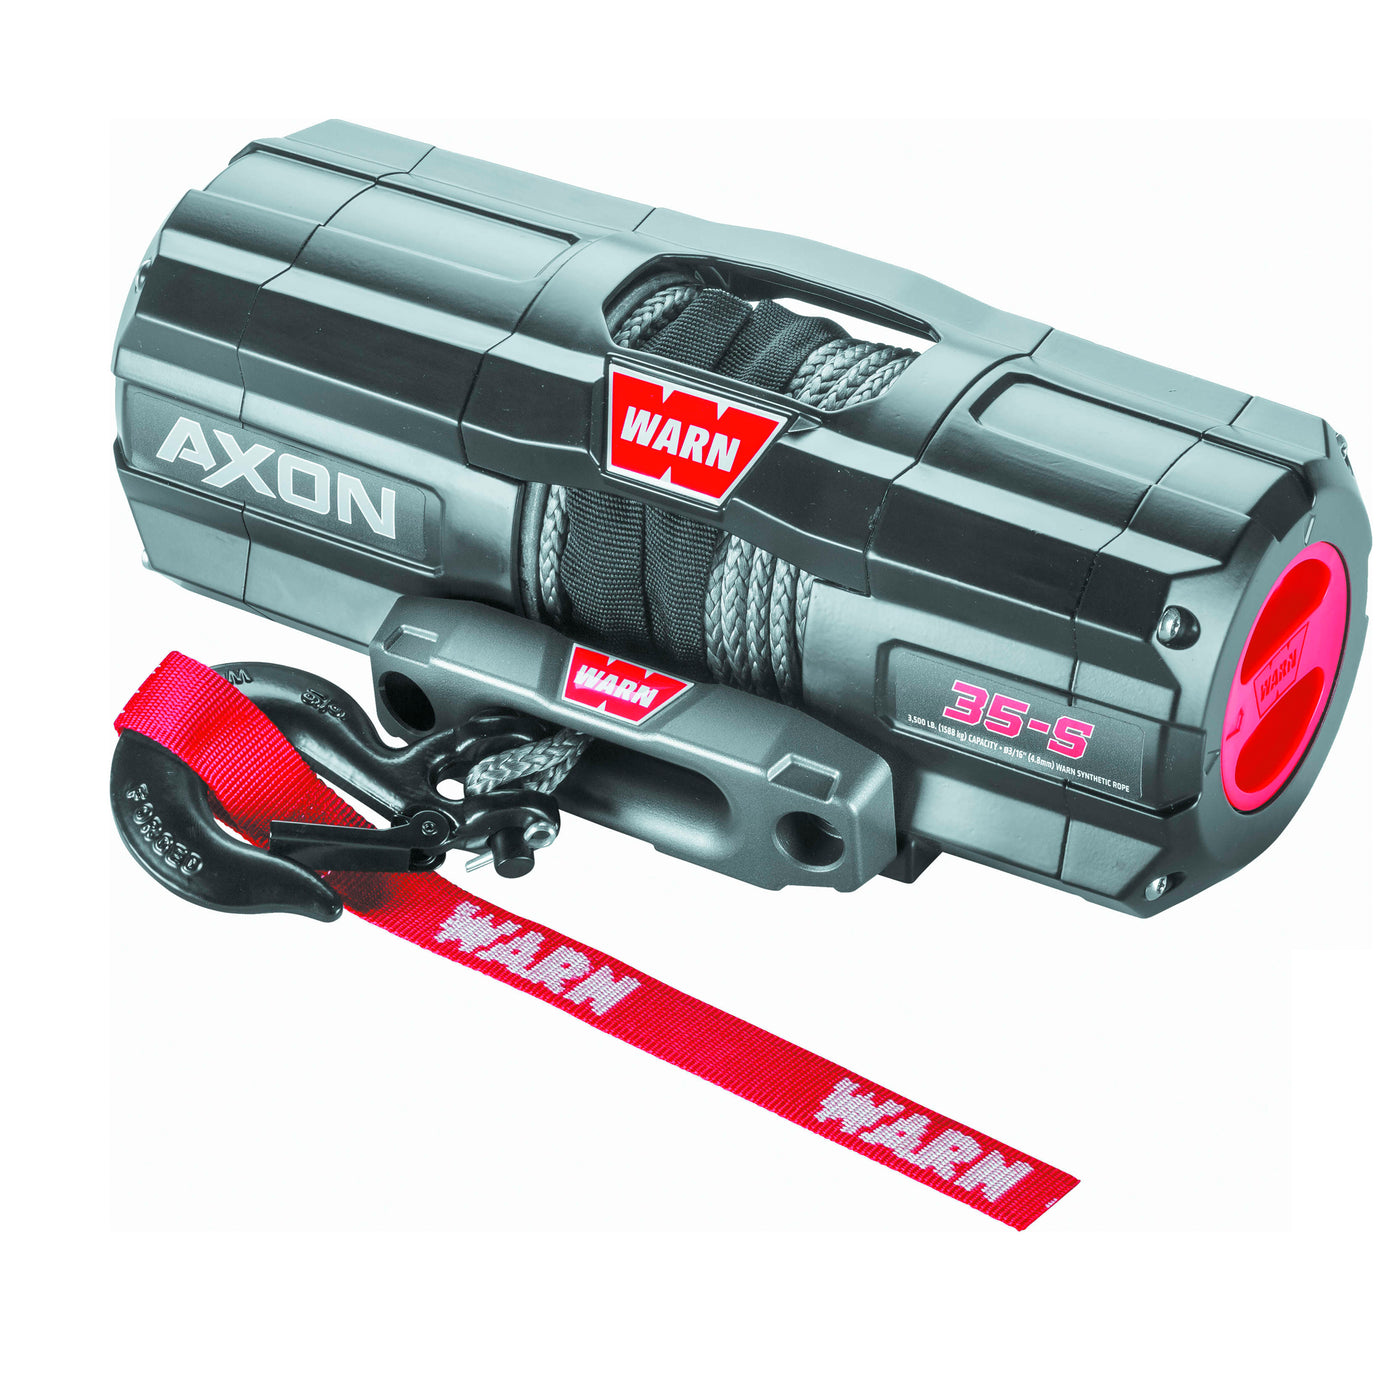 Warn Axon 3500-S Winch With Synthetic Rope